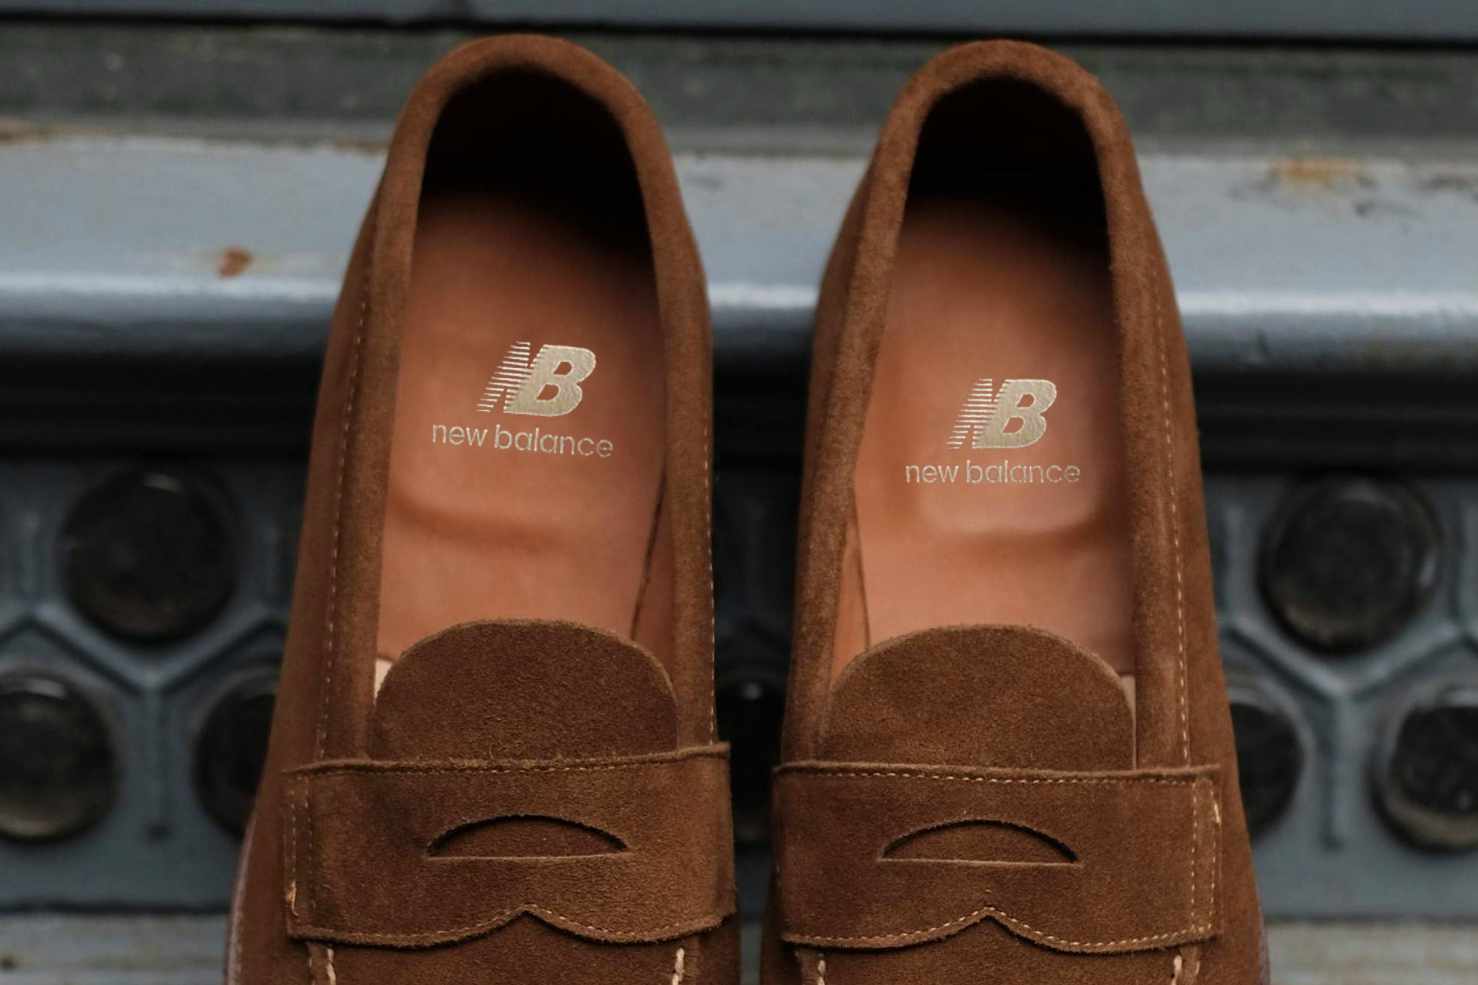 New Balance's brown suede sneaker loafer